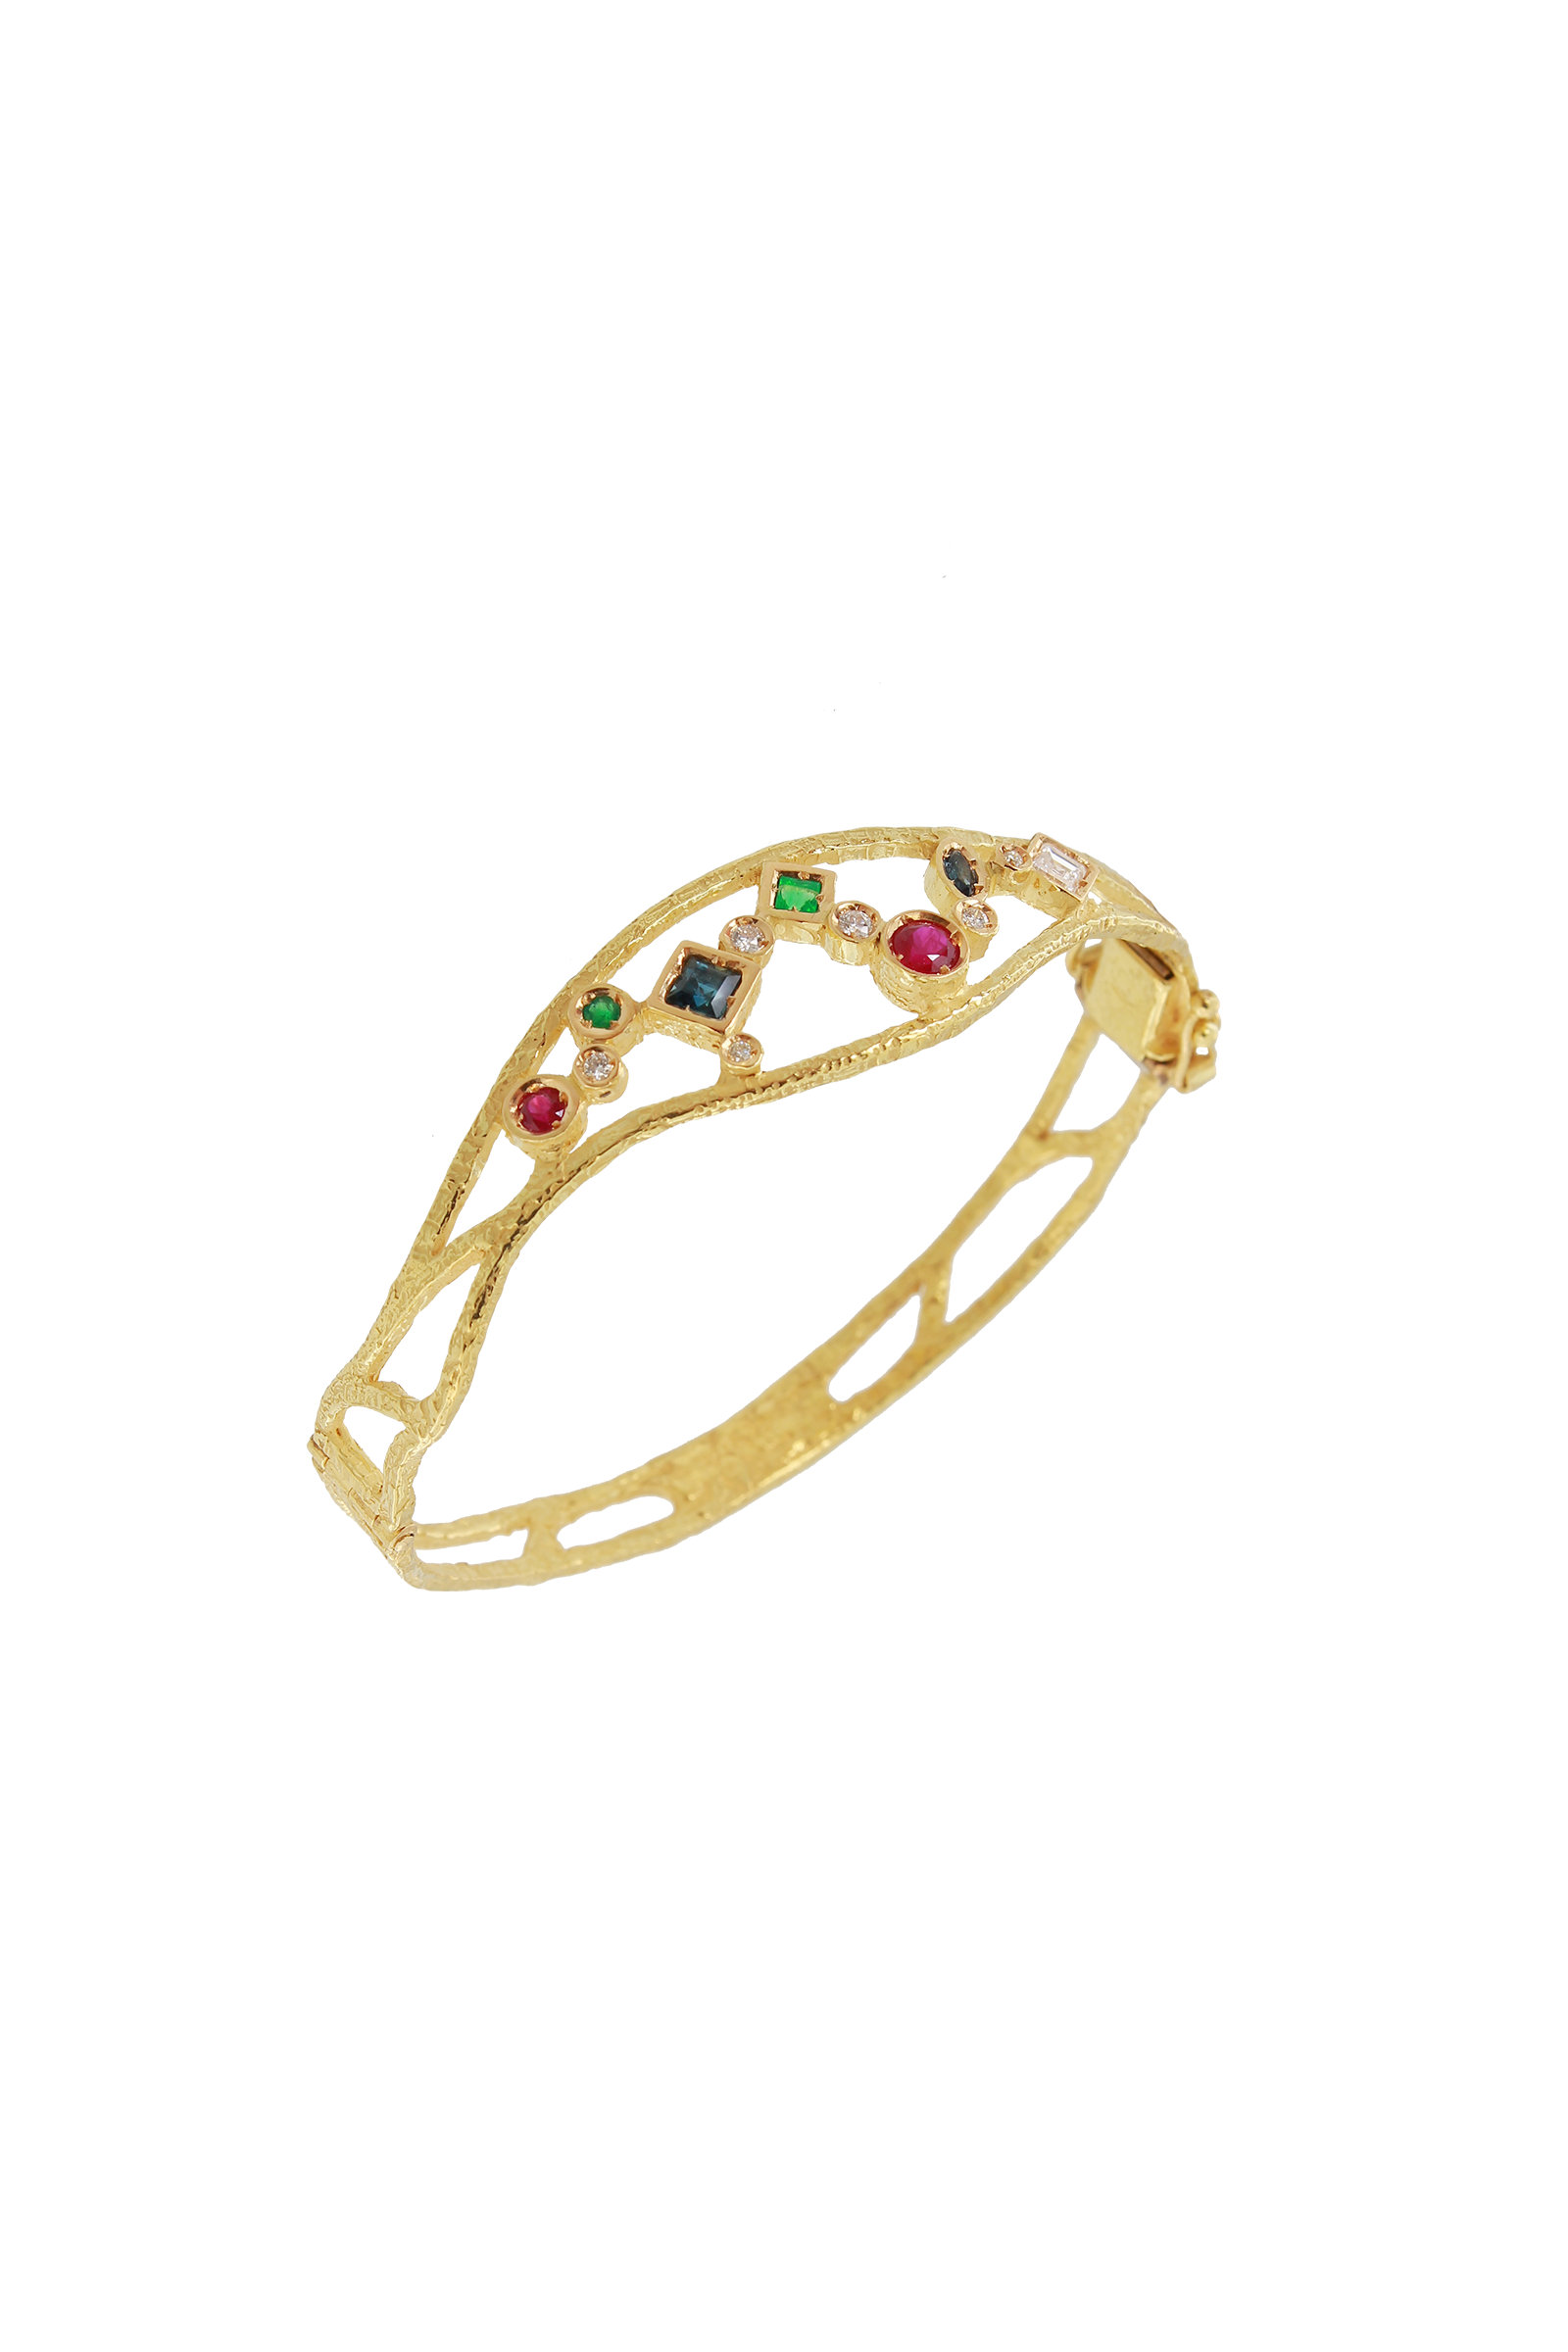 SB243A-18-Kt-Yellow-Gold-Rigid-Bracelet-with-Rubies-Emeralds-Sapphires-and-Diamonds-1